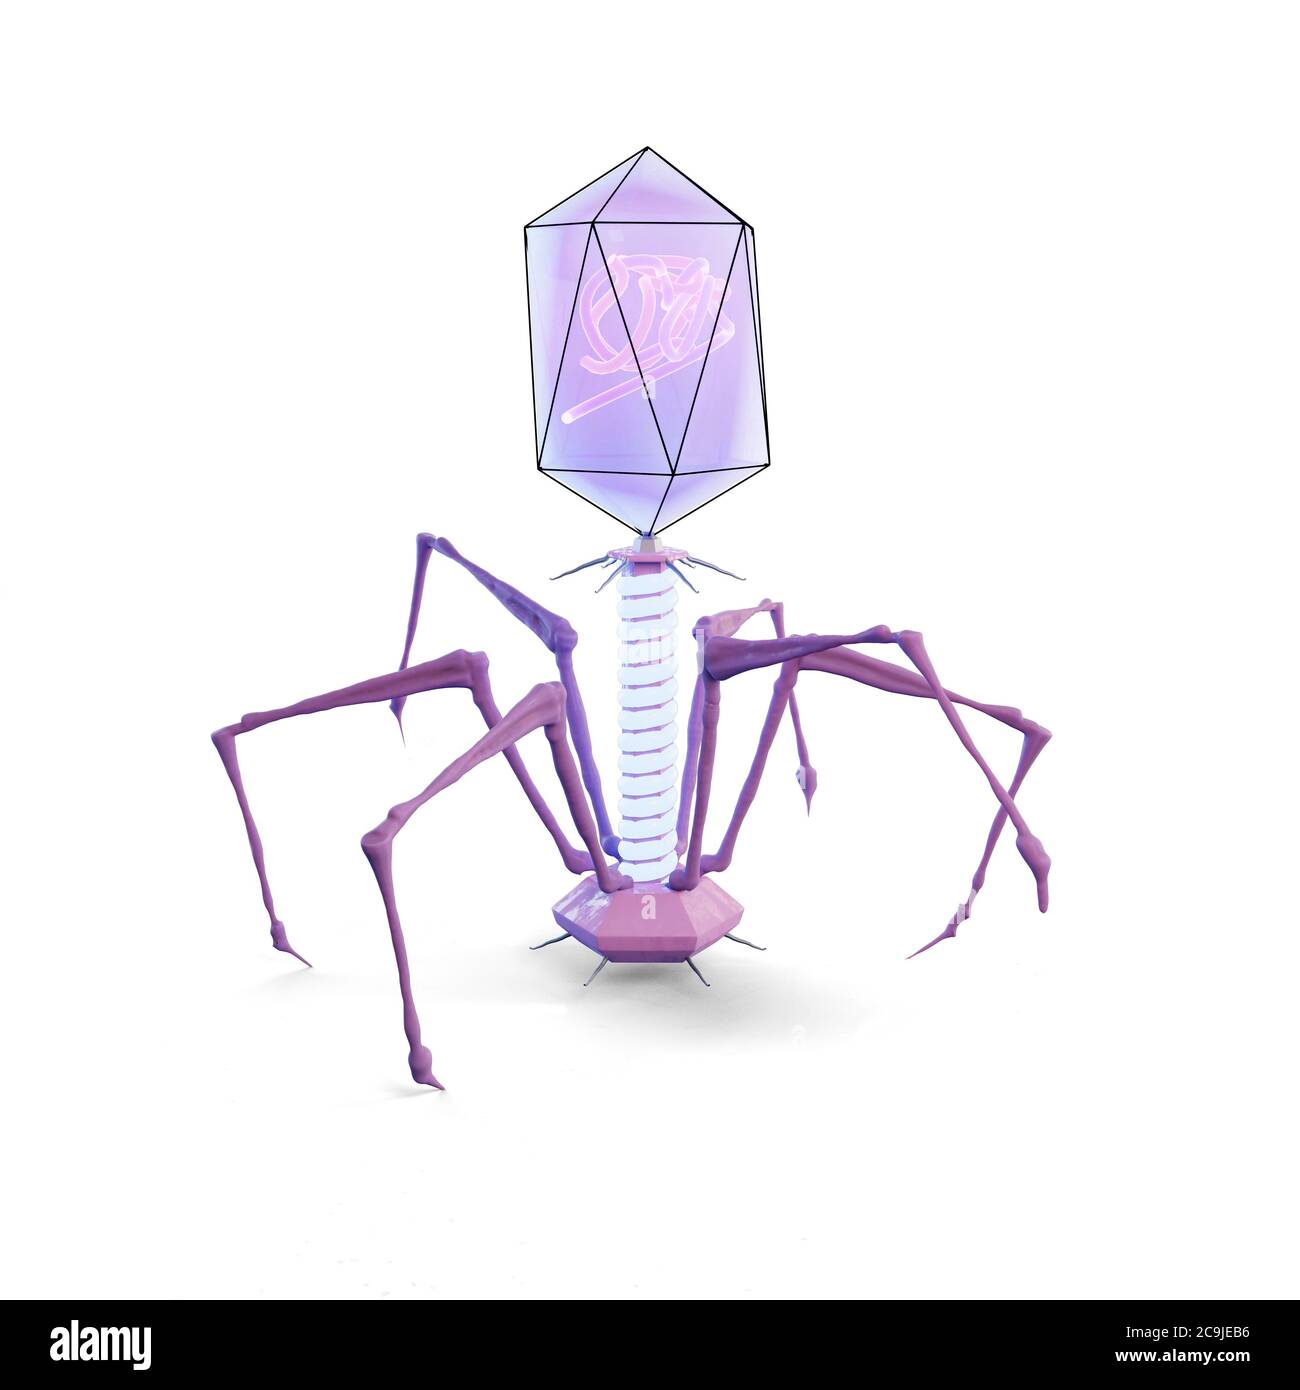 Computer illustration of a bacteriophage. Bacteriophages are viruses that infect bacteria. They are used in phage therapy. Stock Photo